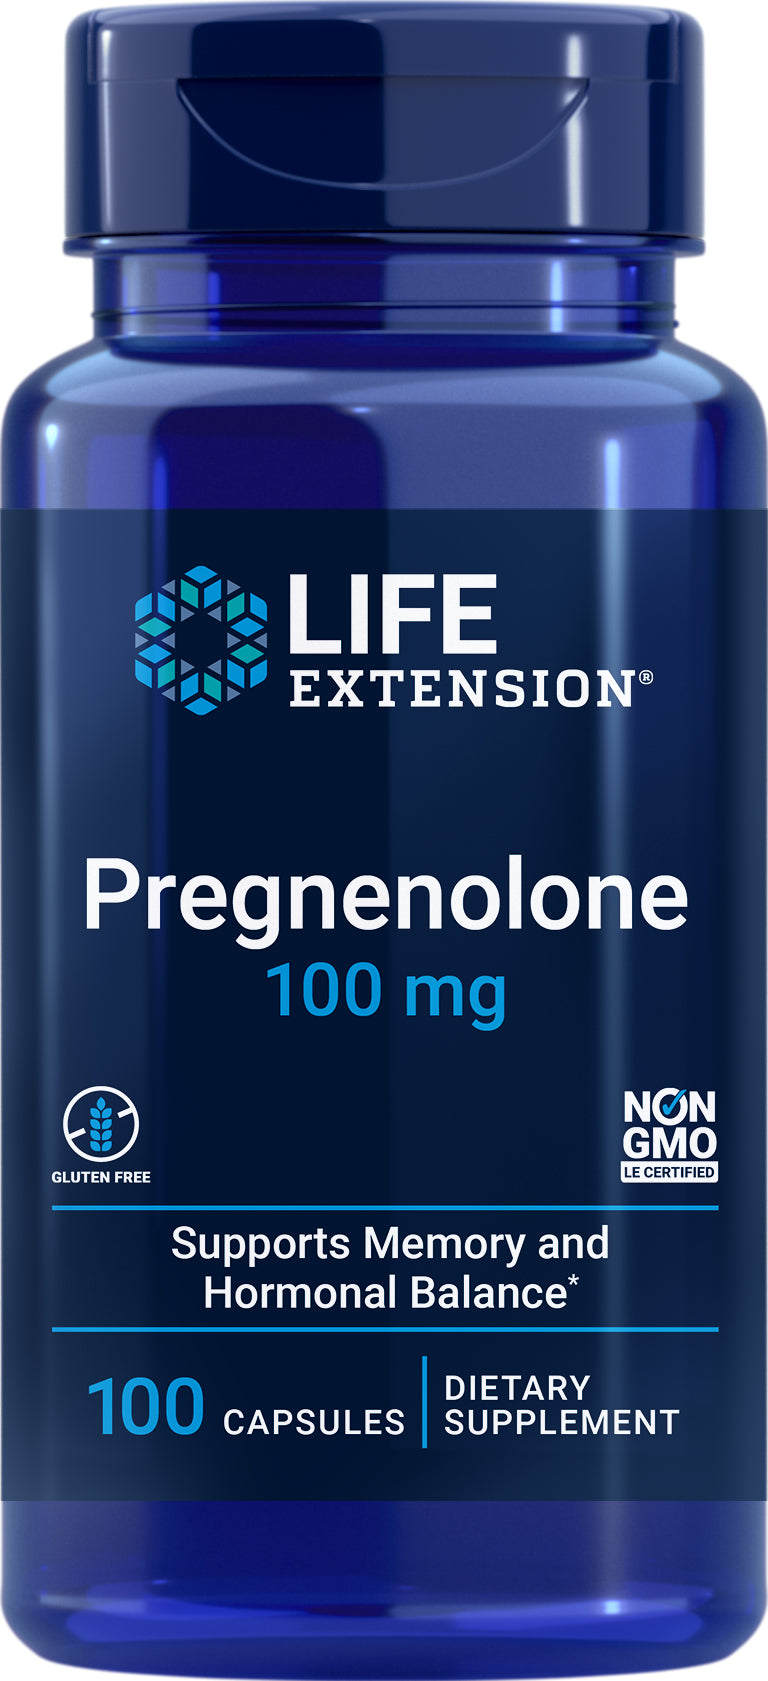 Pregnenolone 100 mg, 100 caps by Life Extension